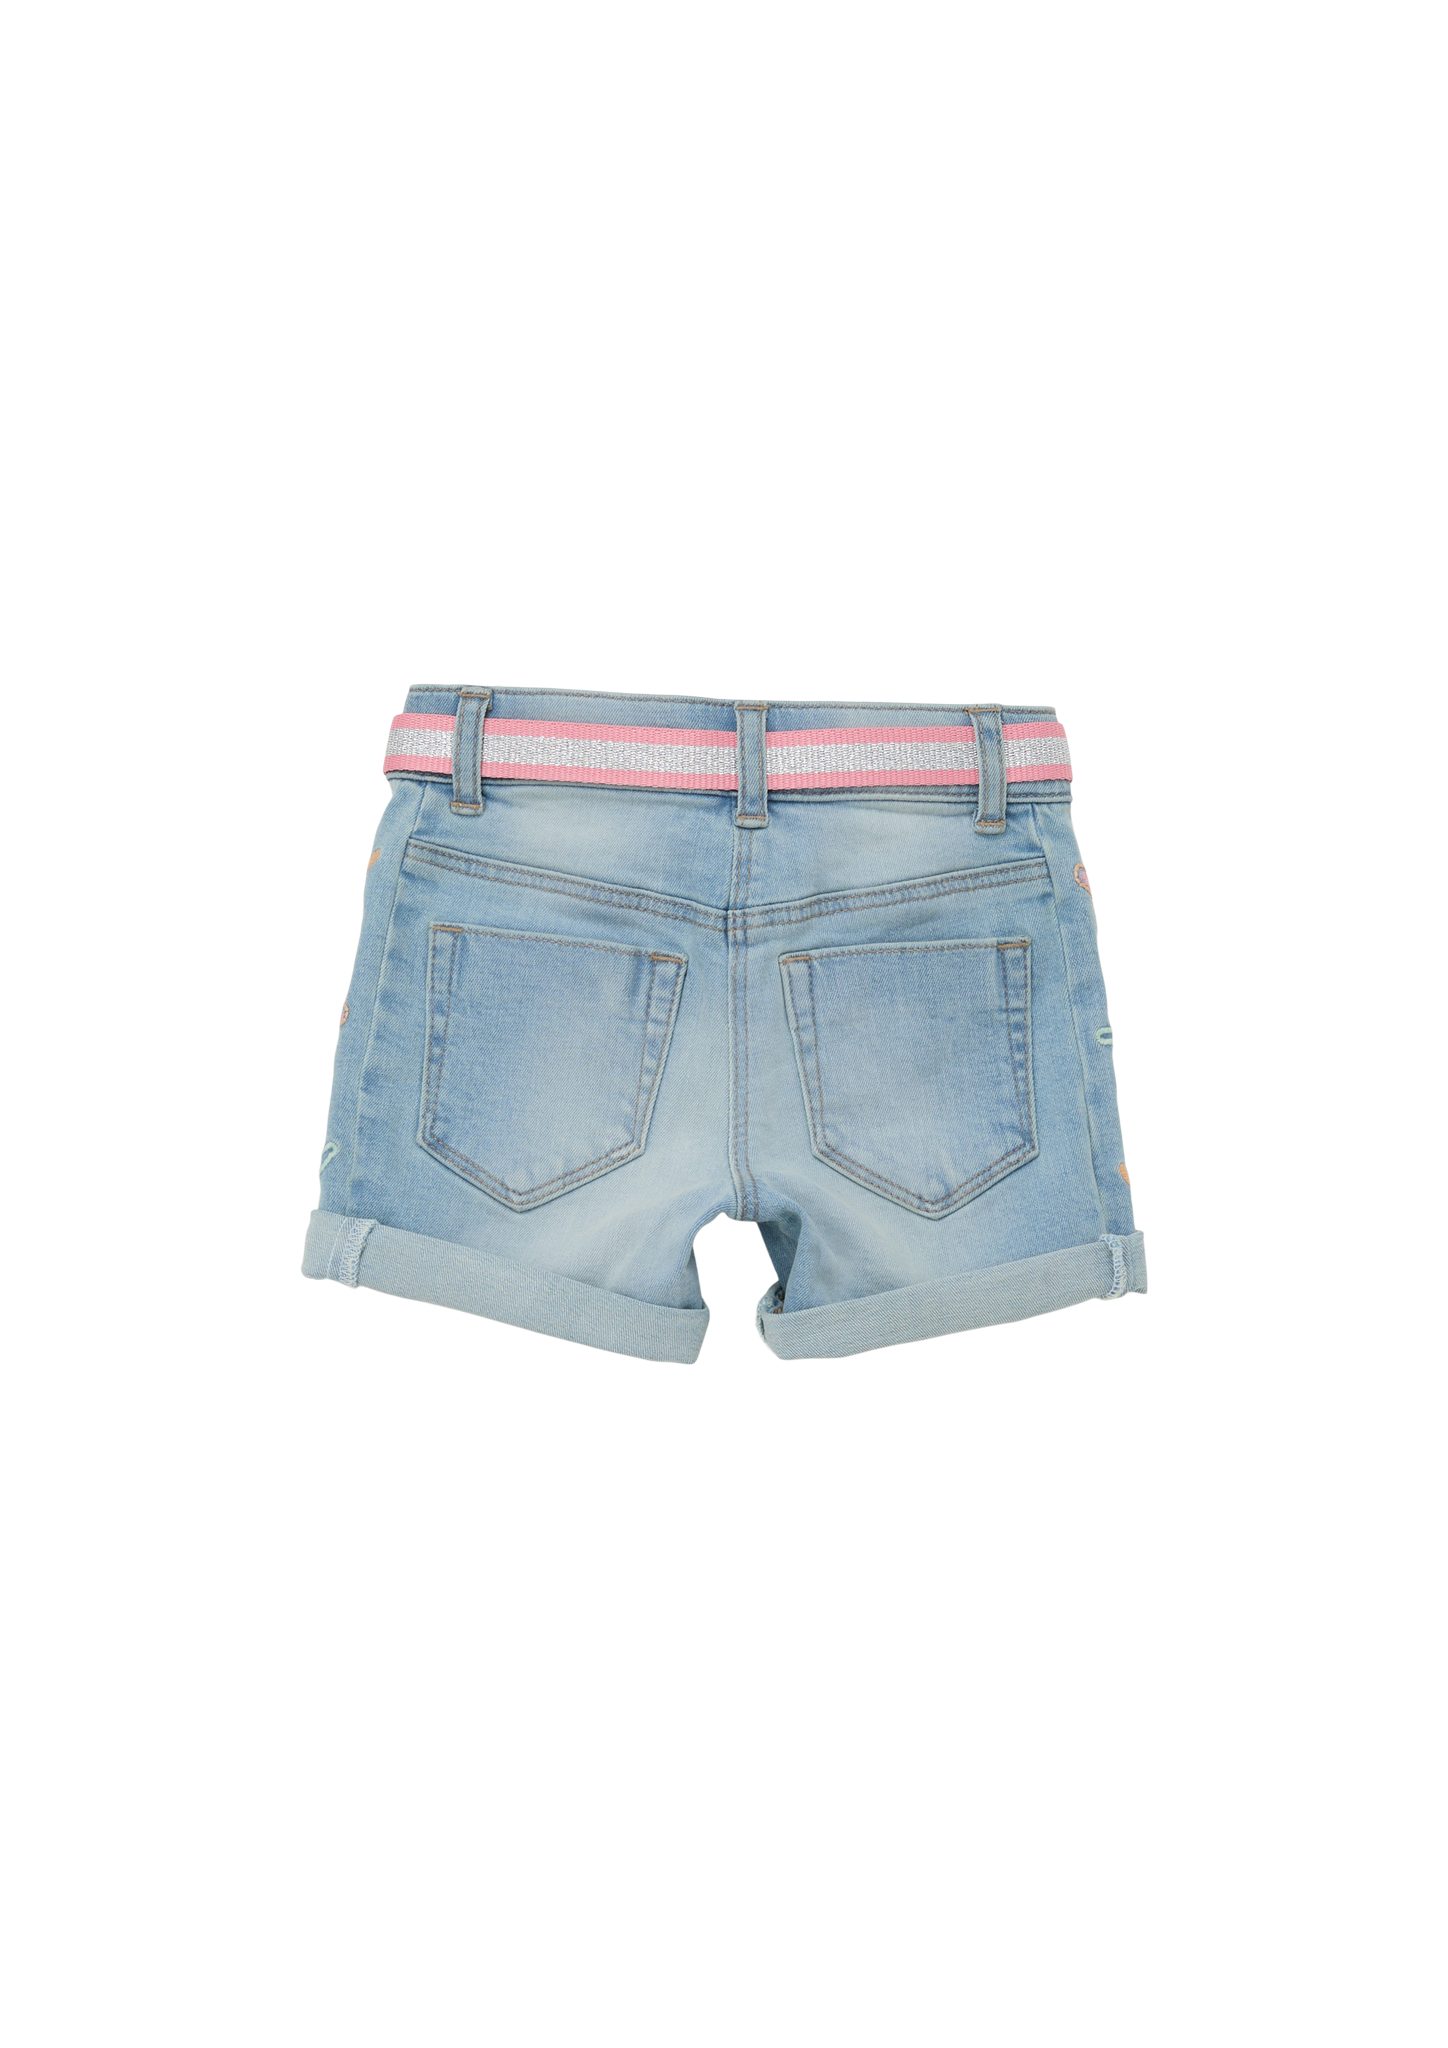 s.Oliver Jeansshorts Jeans-Shorts / / / Straight Stickerei, Mid Rise Leg Fit Waschung Regular